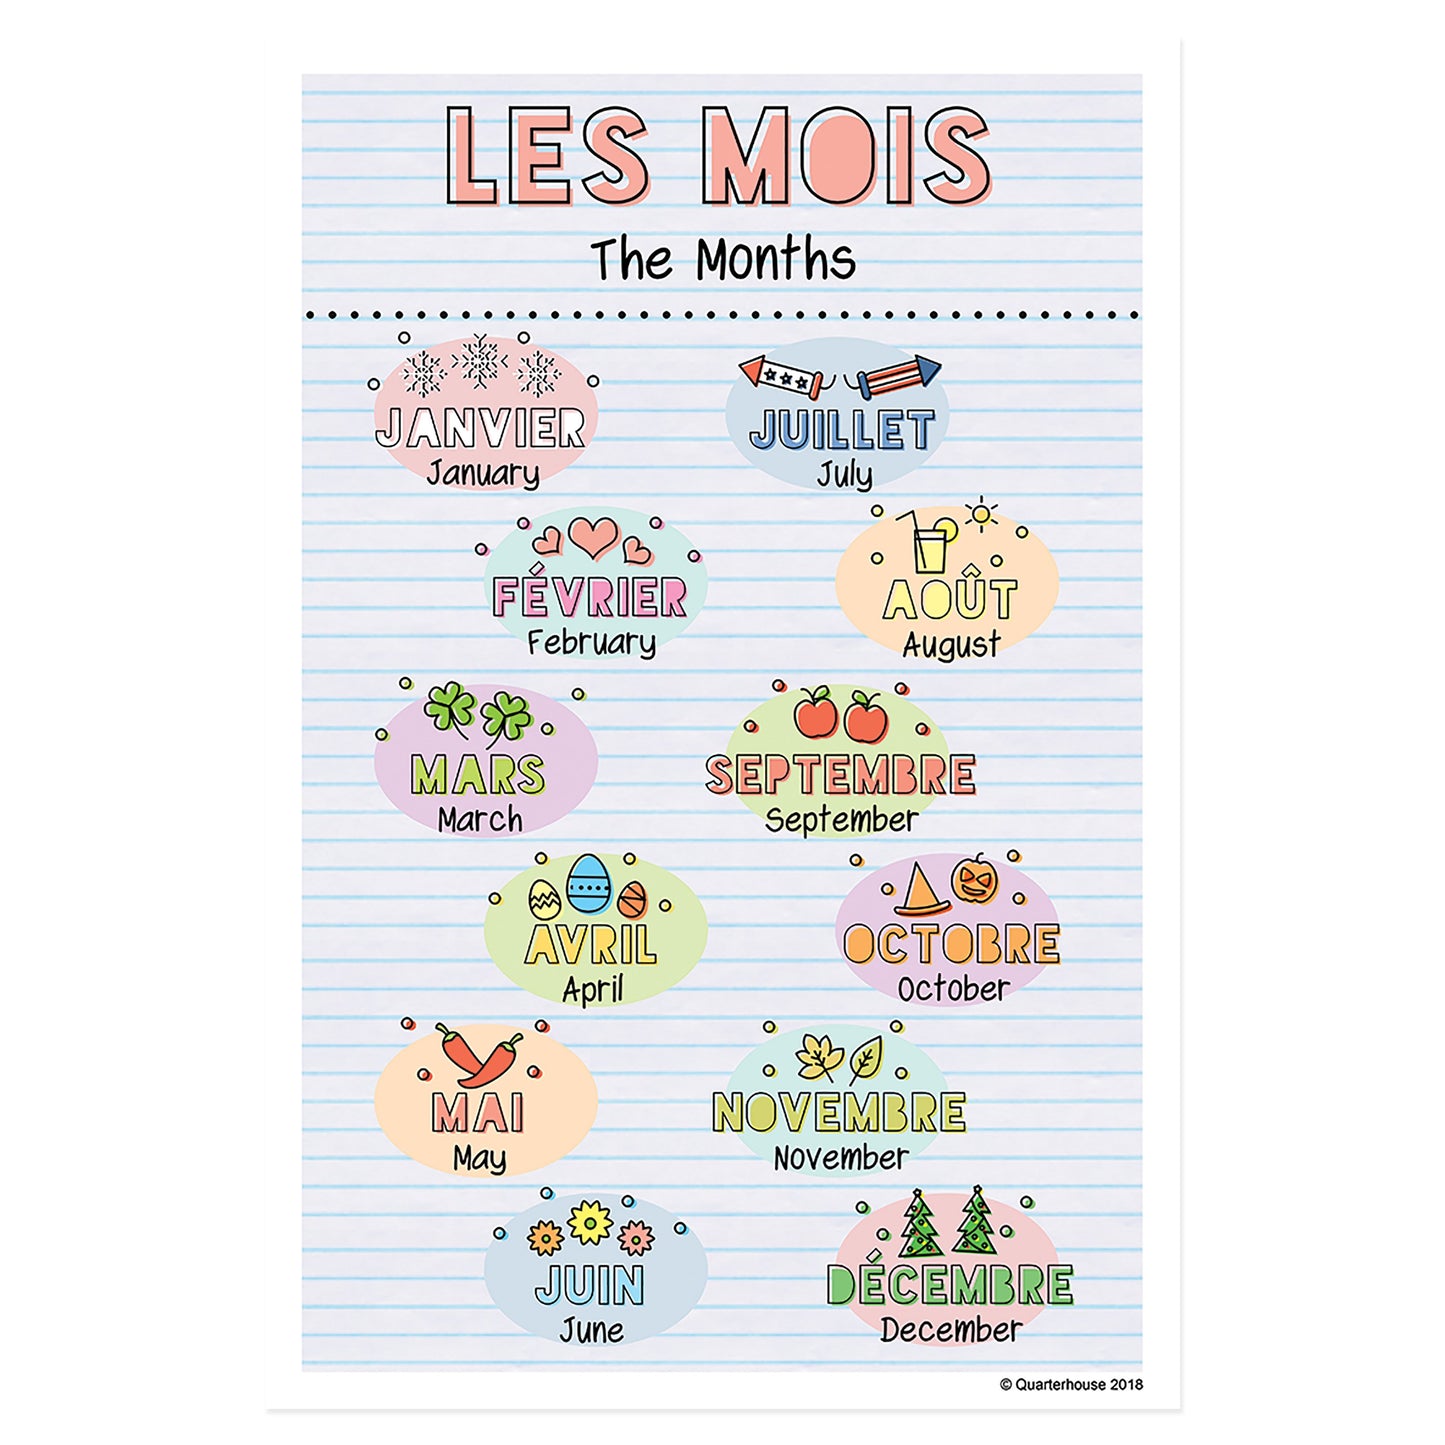 Quarterhouse French Vocabulary - Months of the Year Poster, French and ESL Classroom Materials for Teachers